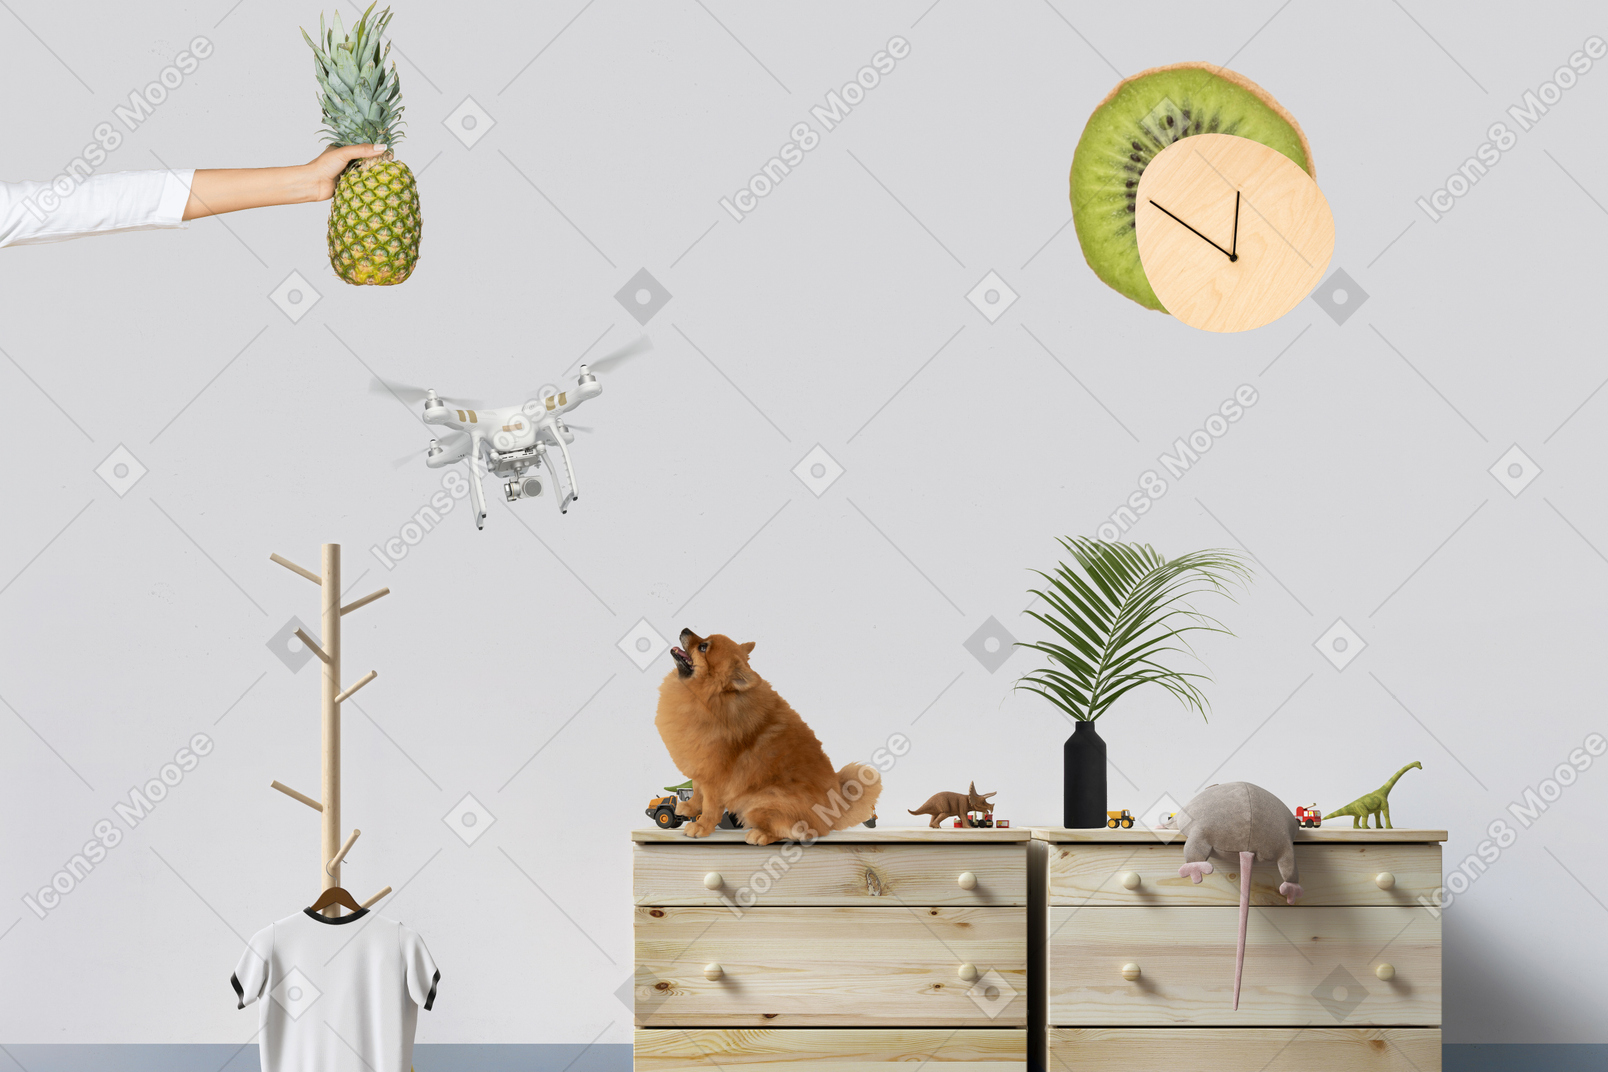 A person holding a pineapple above a dresser with a dog sitting on it